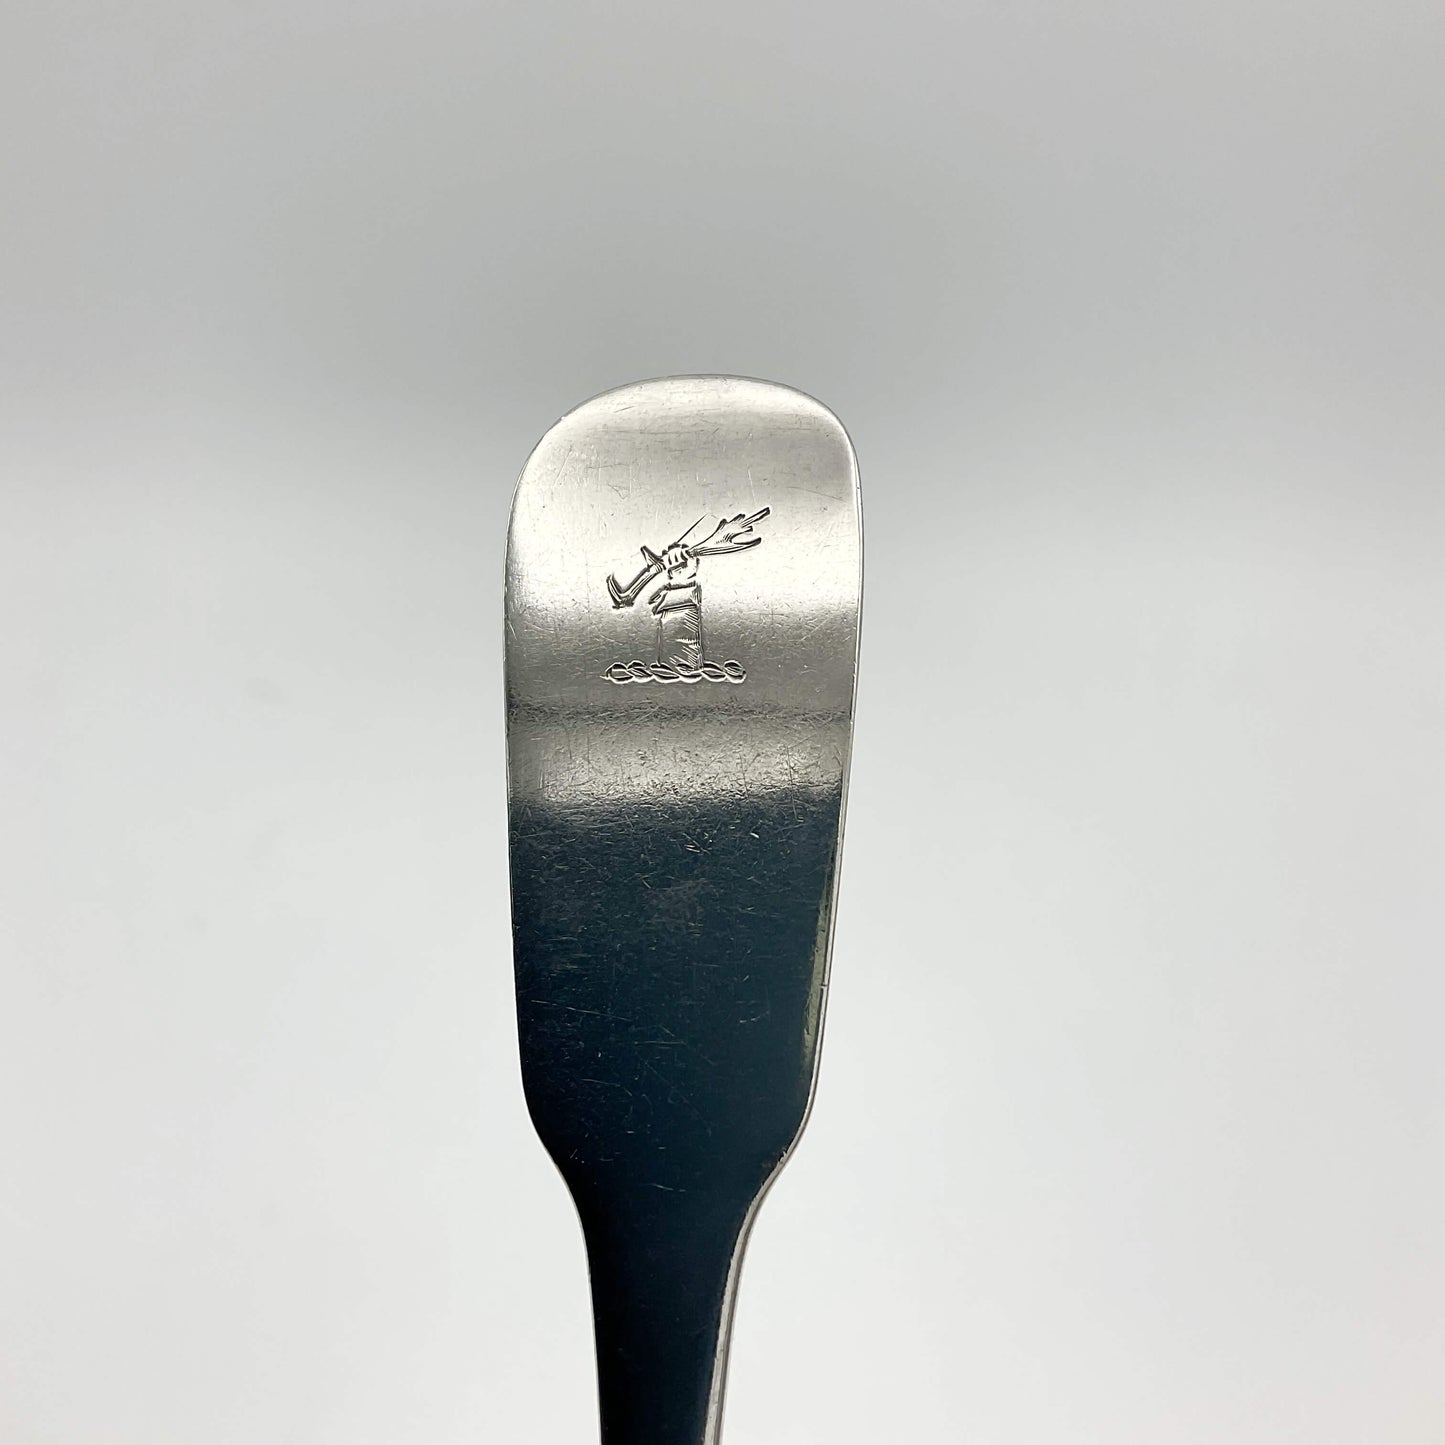 Top of handle of Antique silver spoon showing a motif of a hand holding an antler